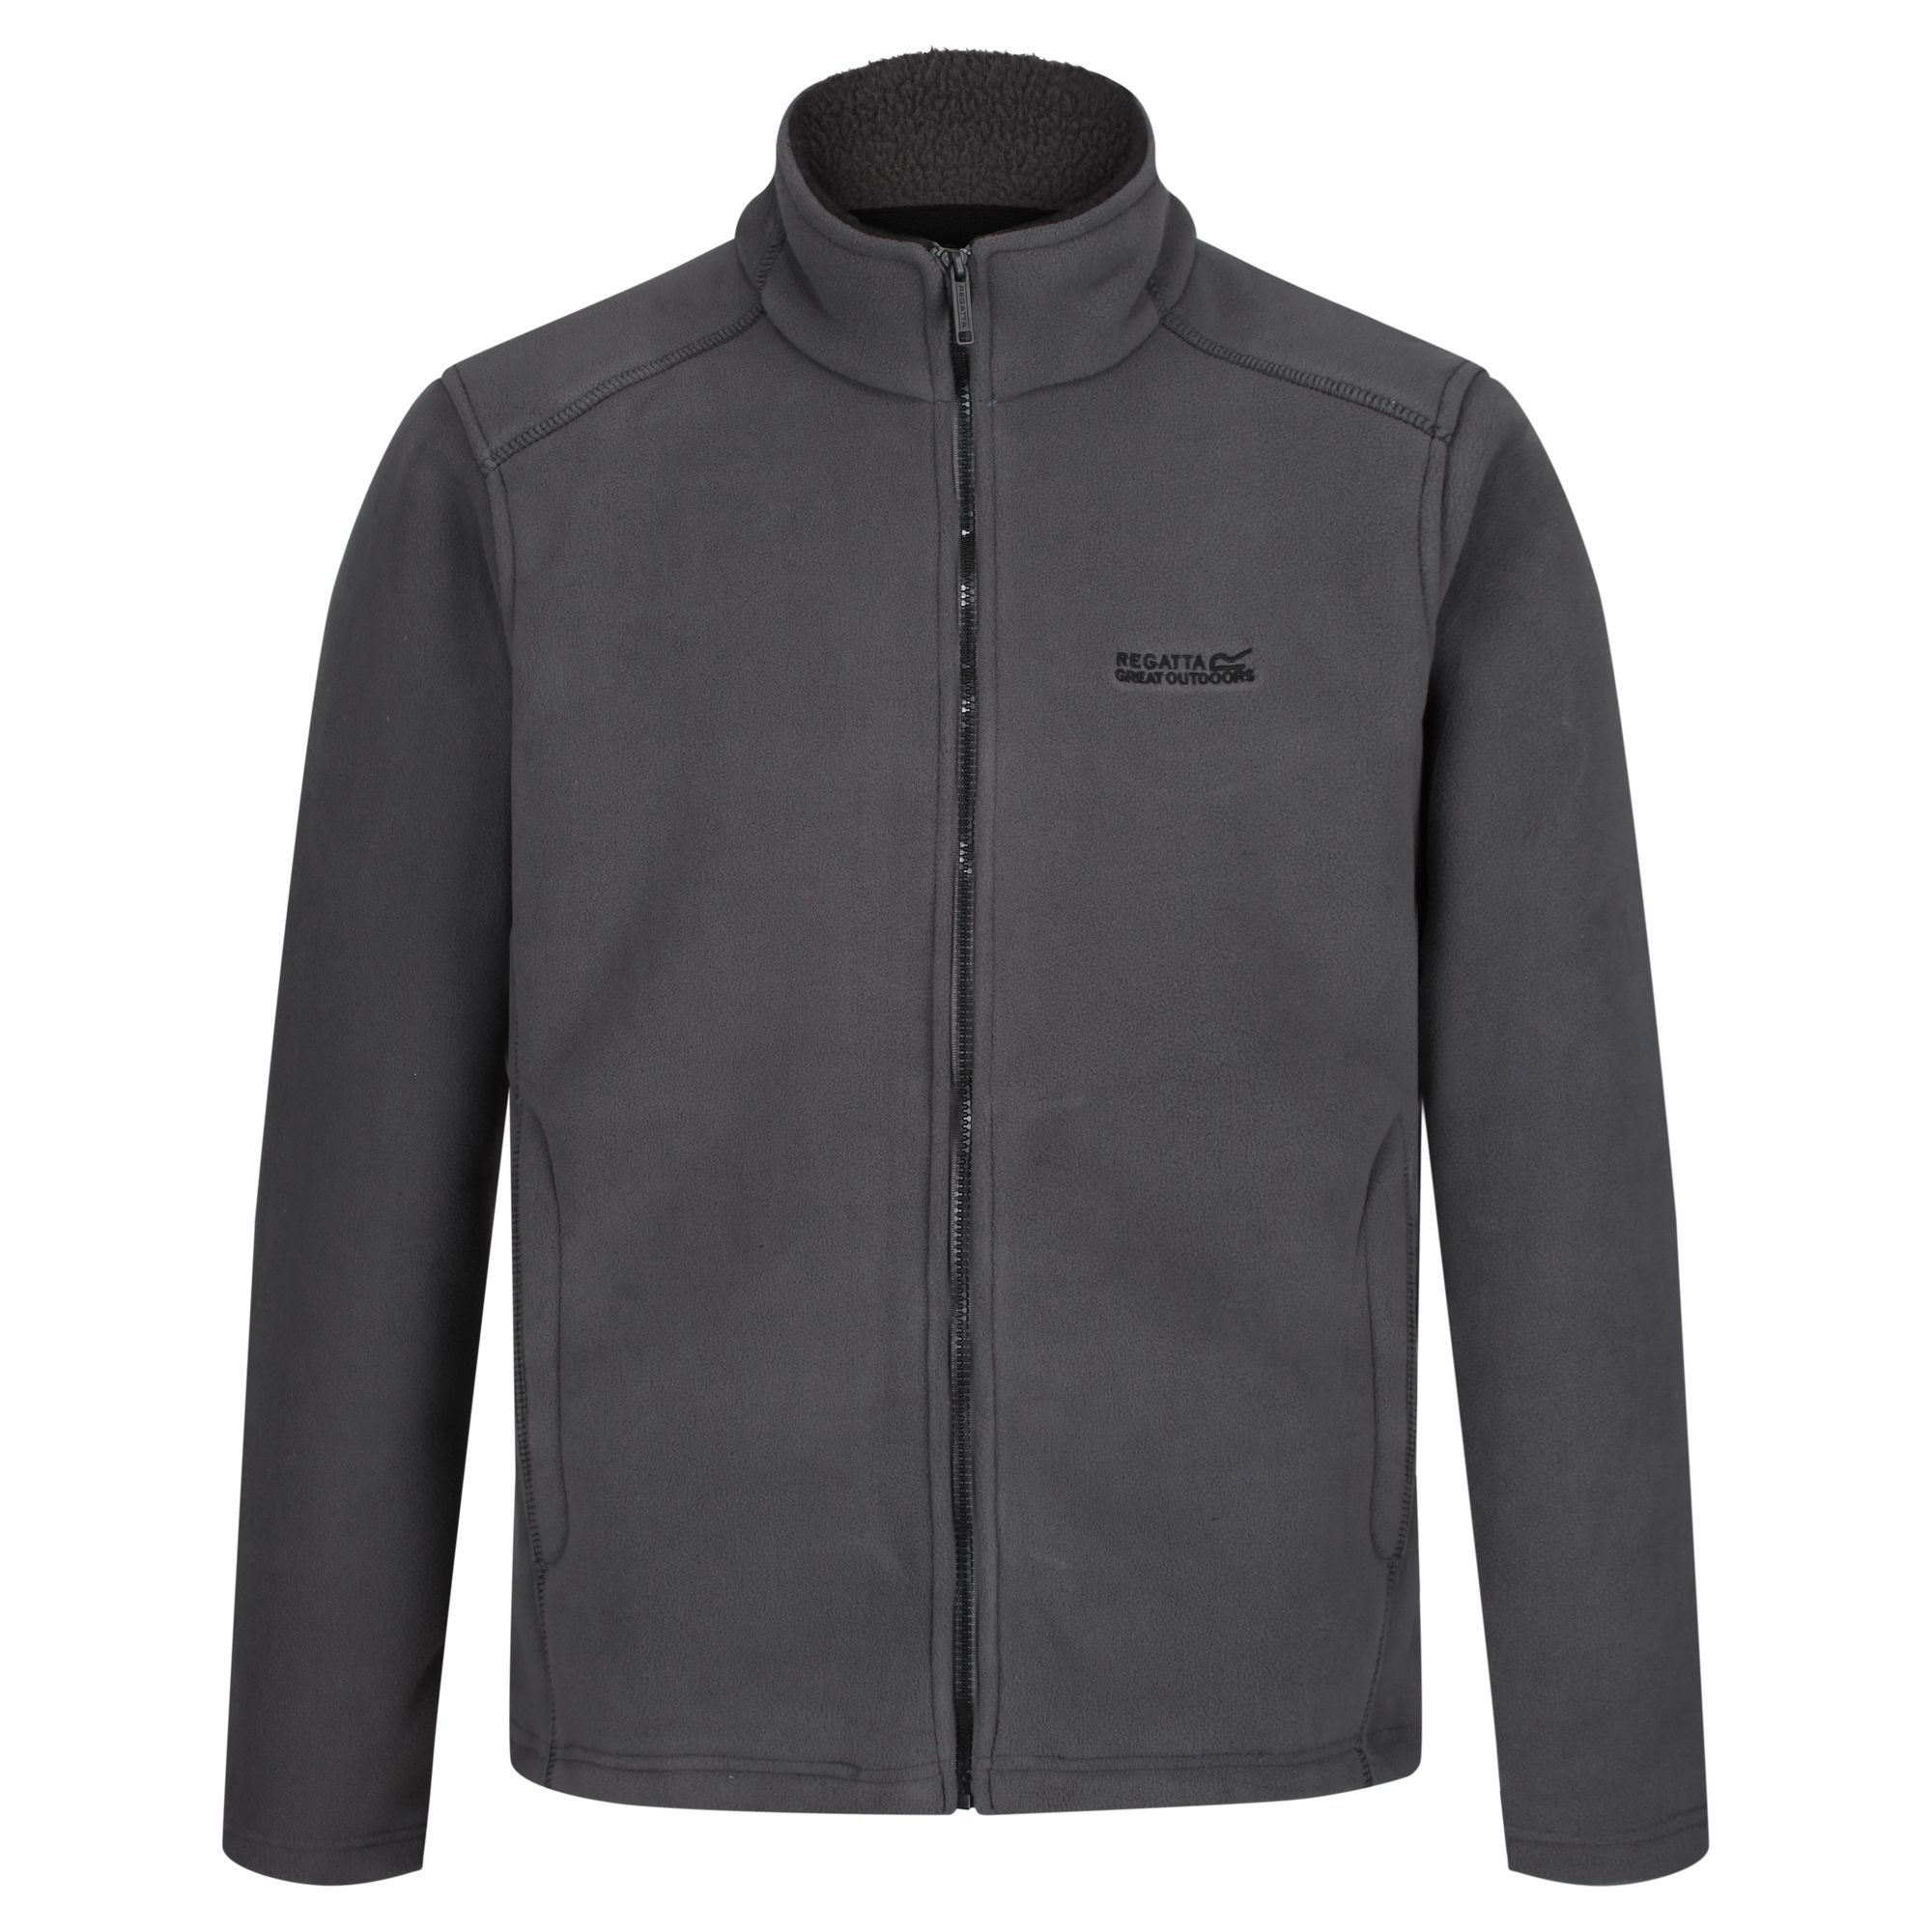 Mens full zip jacket made of 440gsm sherpa backed Polyester microfleece. 2 zipped lower pockets. Adjustable shockcord hem. Ideal for wearing outdoors on a cold day. 100% Polyester.